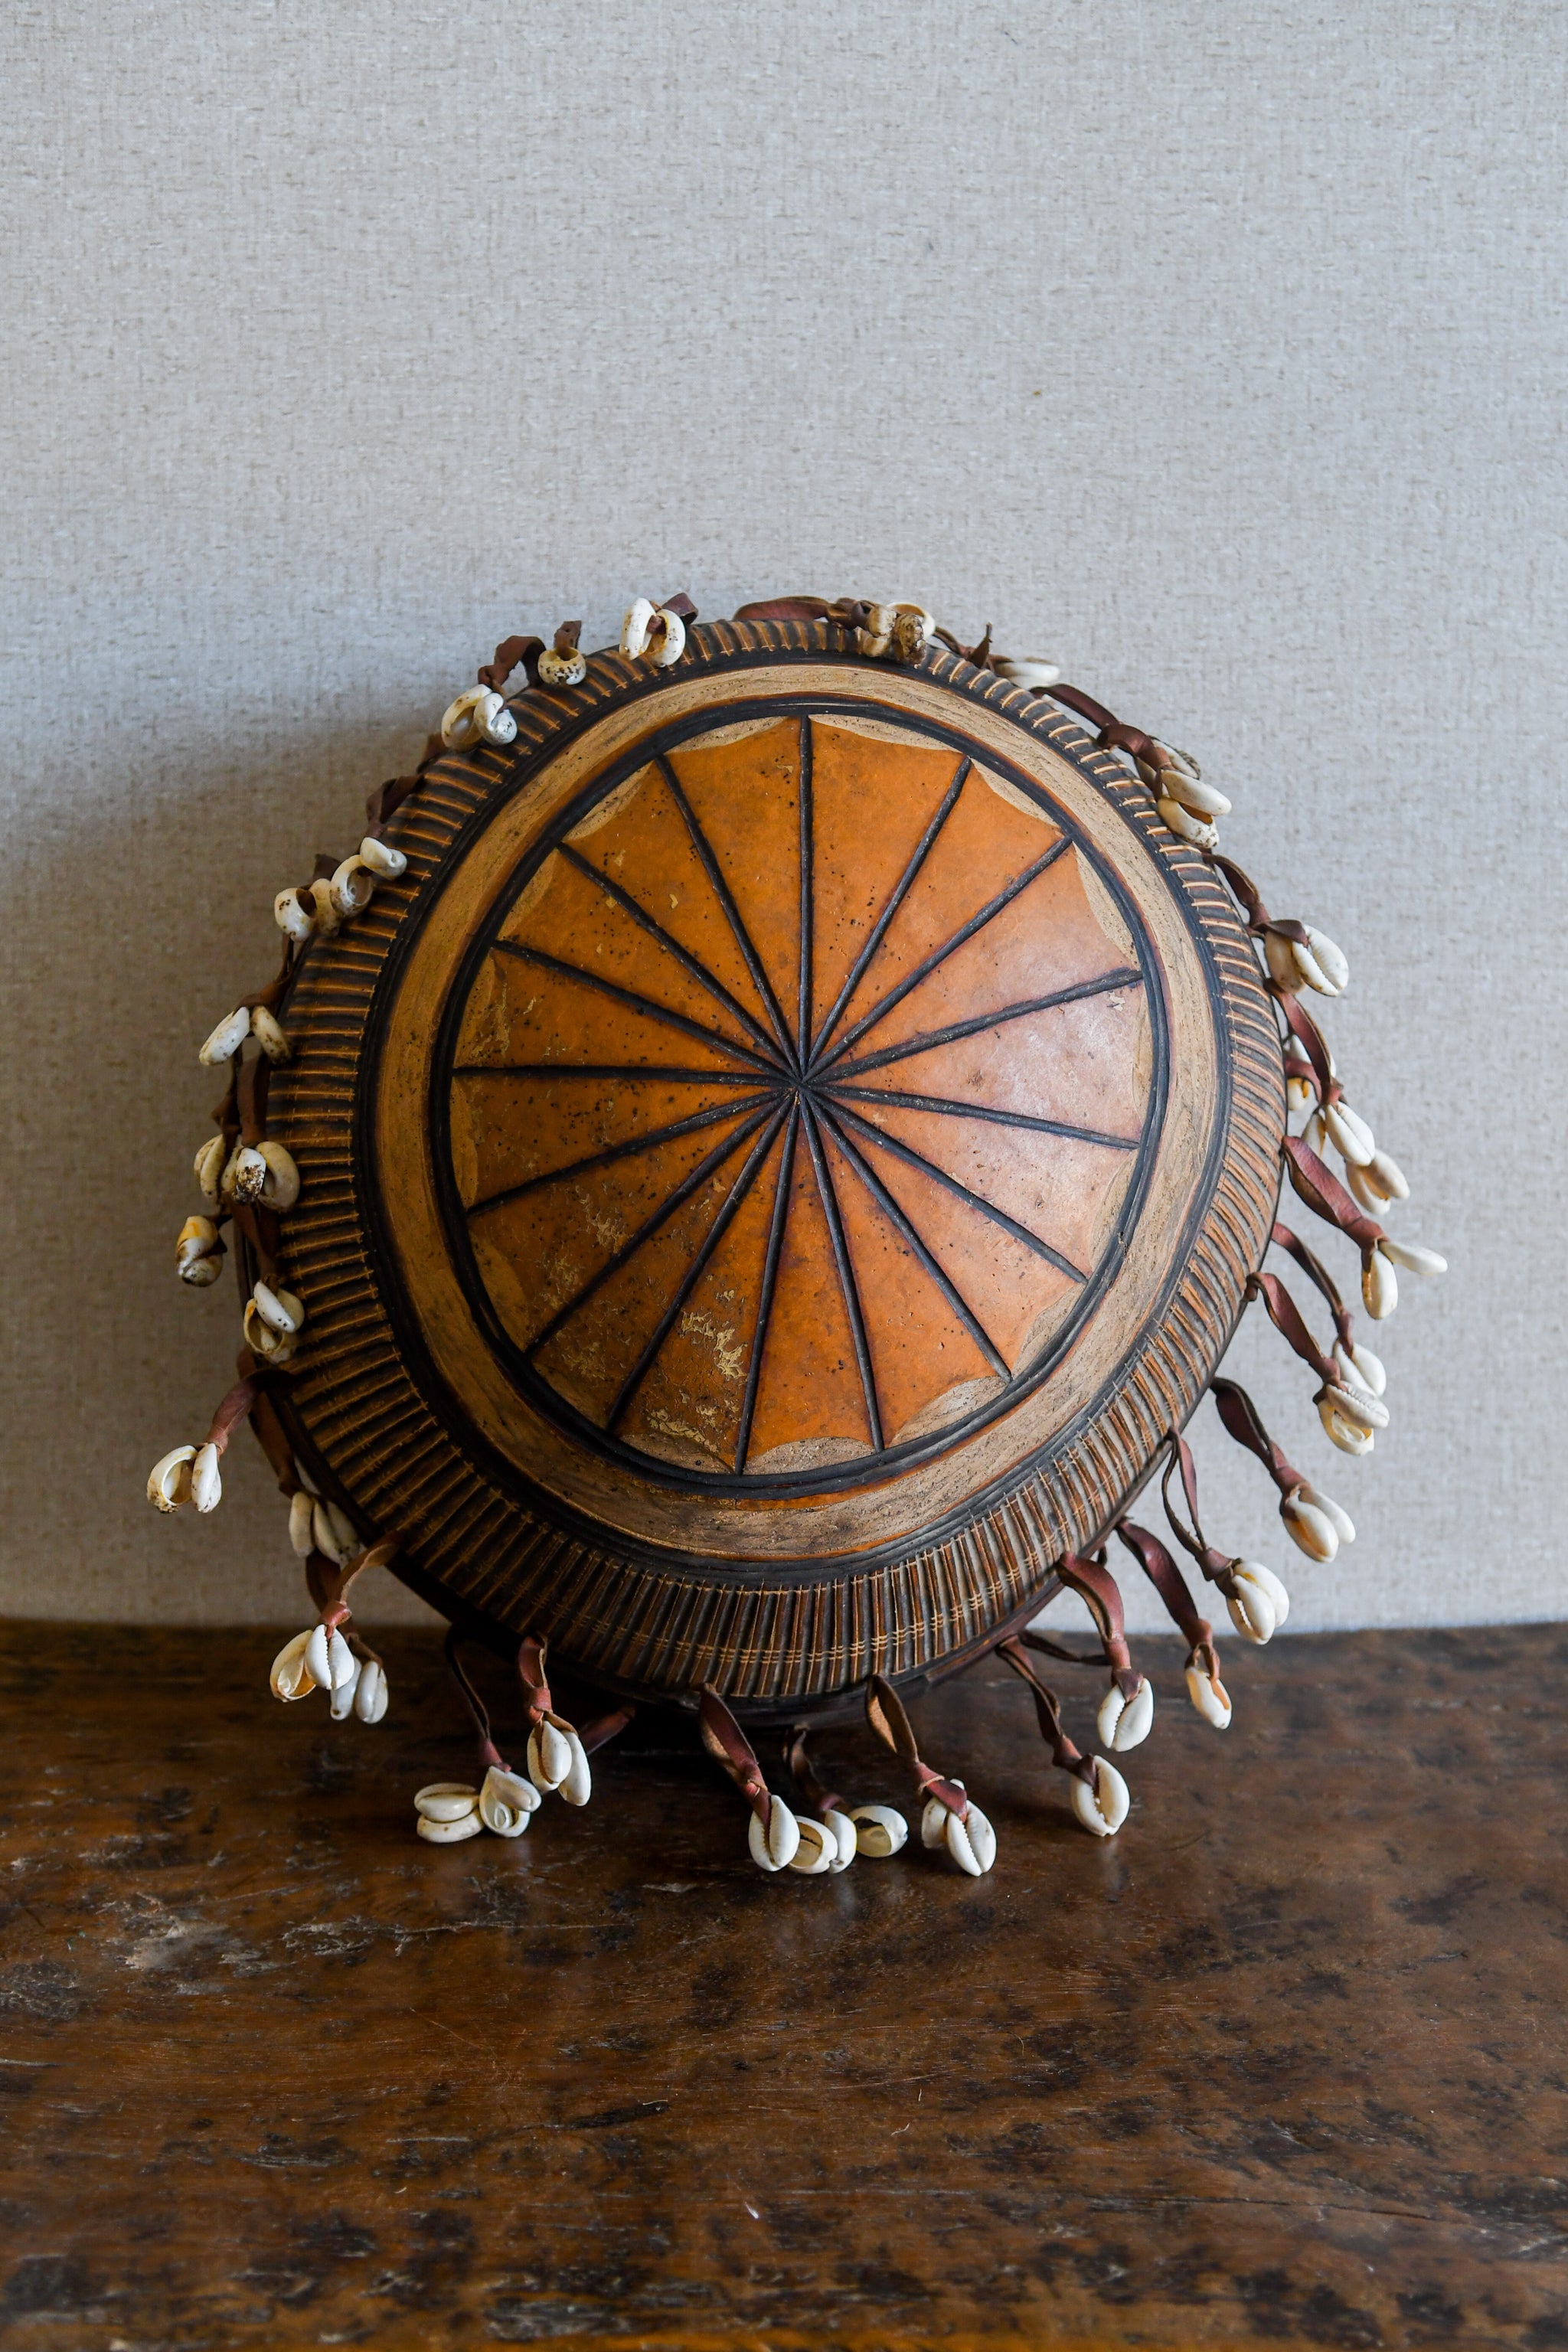 Tribal Objects - African Tribal Art - Ancient Ceremonial Art - Handcrafted Artifacts - Masks - Wood Sculptures - Iron Bronze Objects - Textiles - Art Pieces - African Folk Art - This African Calabash Bowl Cowrie Shell is a unique tribal instrument object, perfect for both home decor and collecting. It speaks to an ethnic, folk art aesthetic and is sure to be a conversation piece with guests. An excellent way to add a touch of culture and history to any space. Length: 13 inches Depth: 7 inches Width: 6